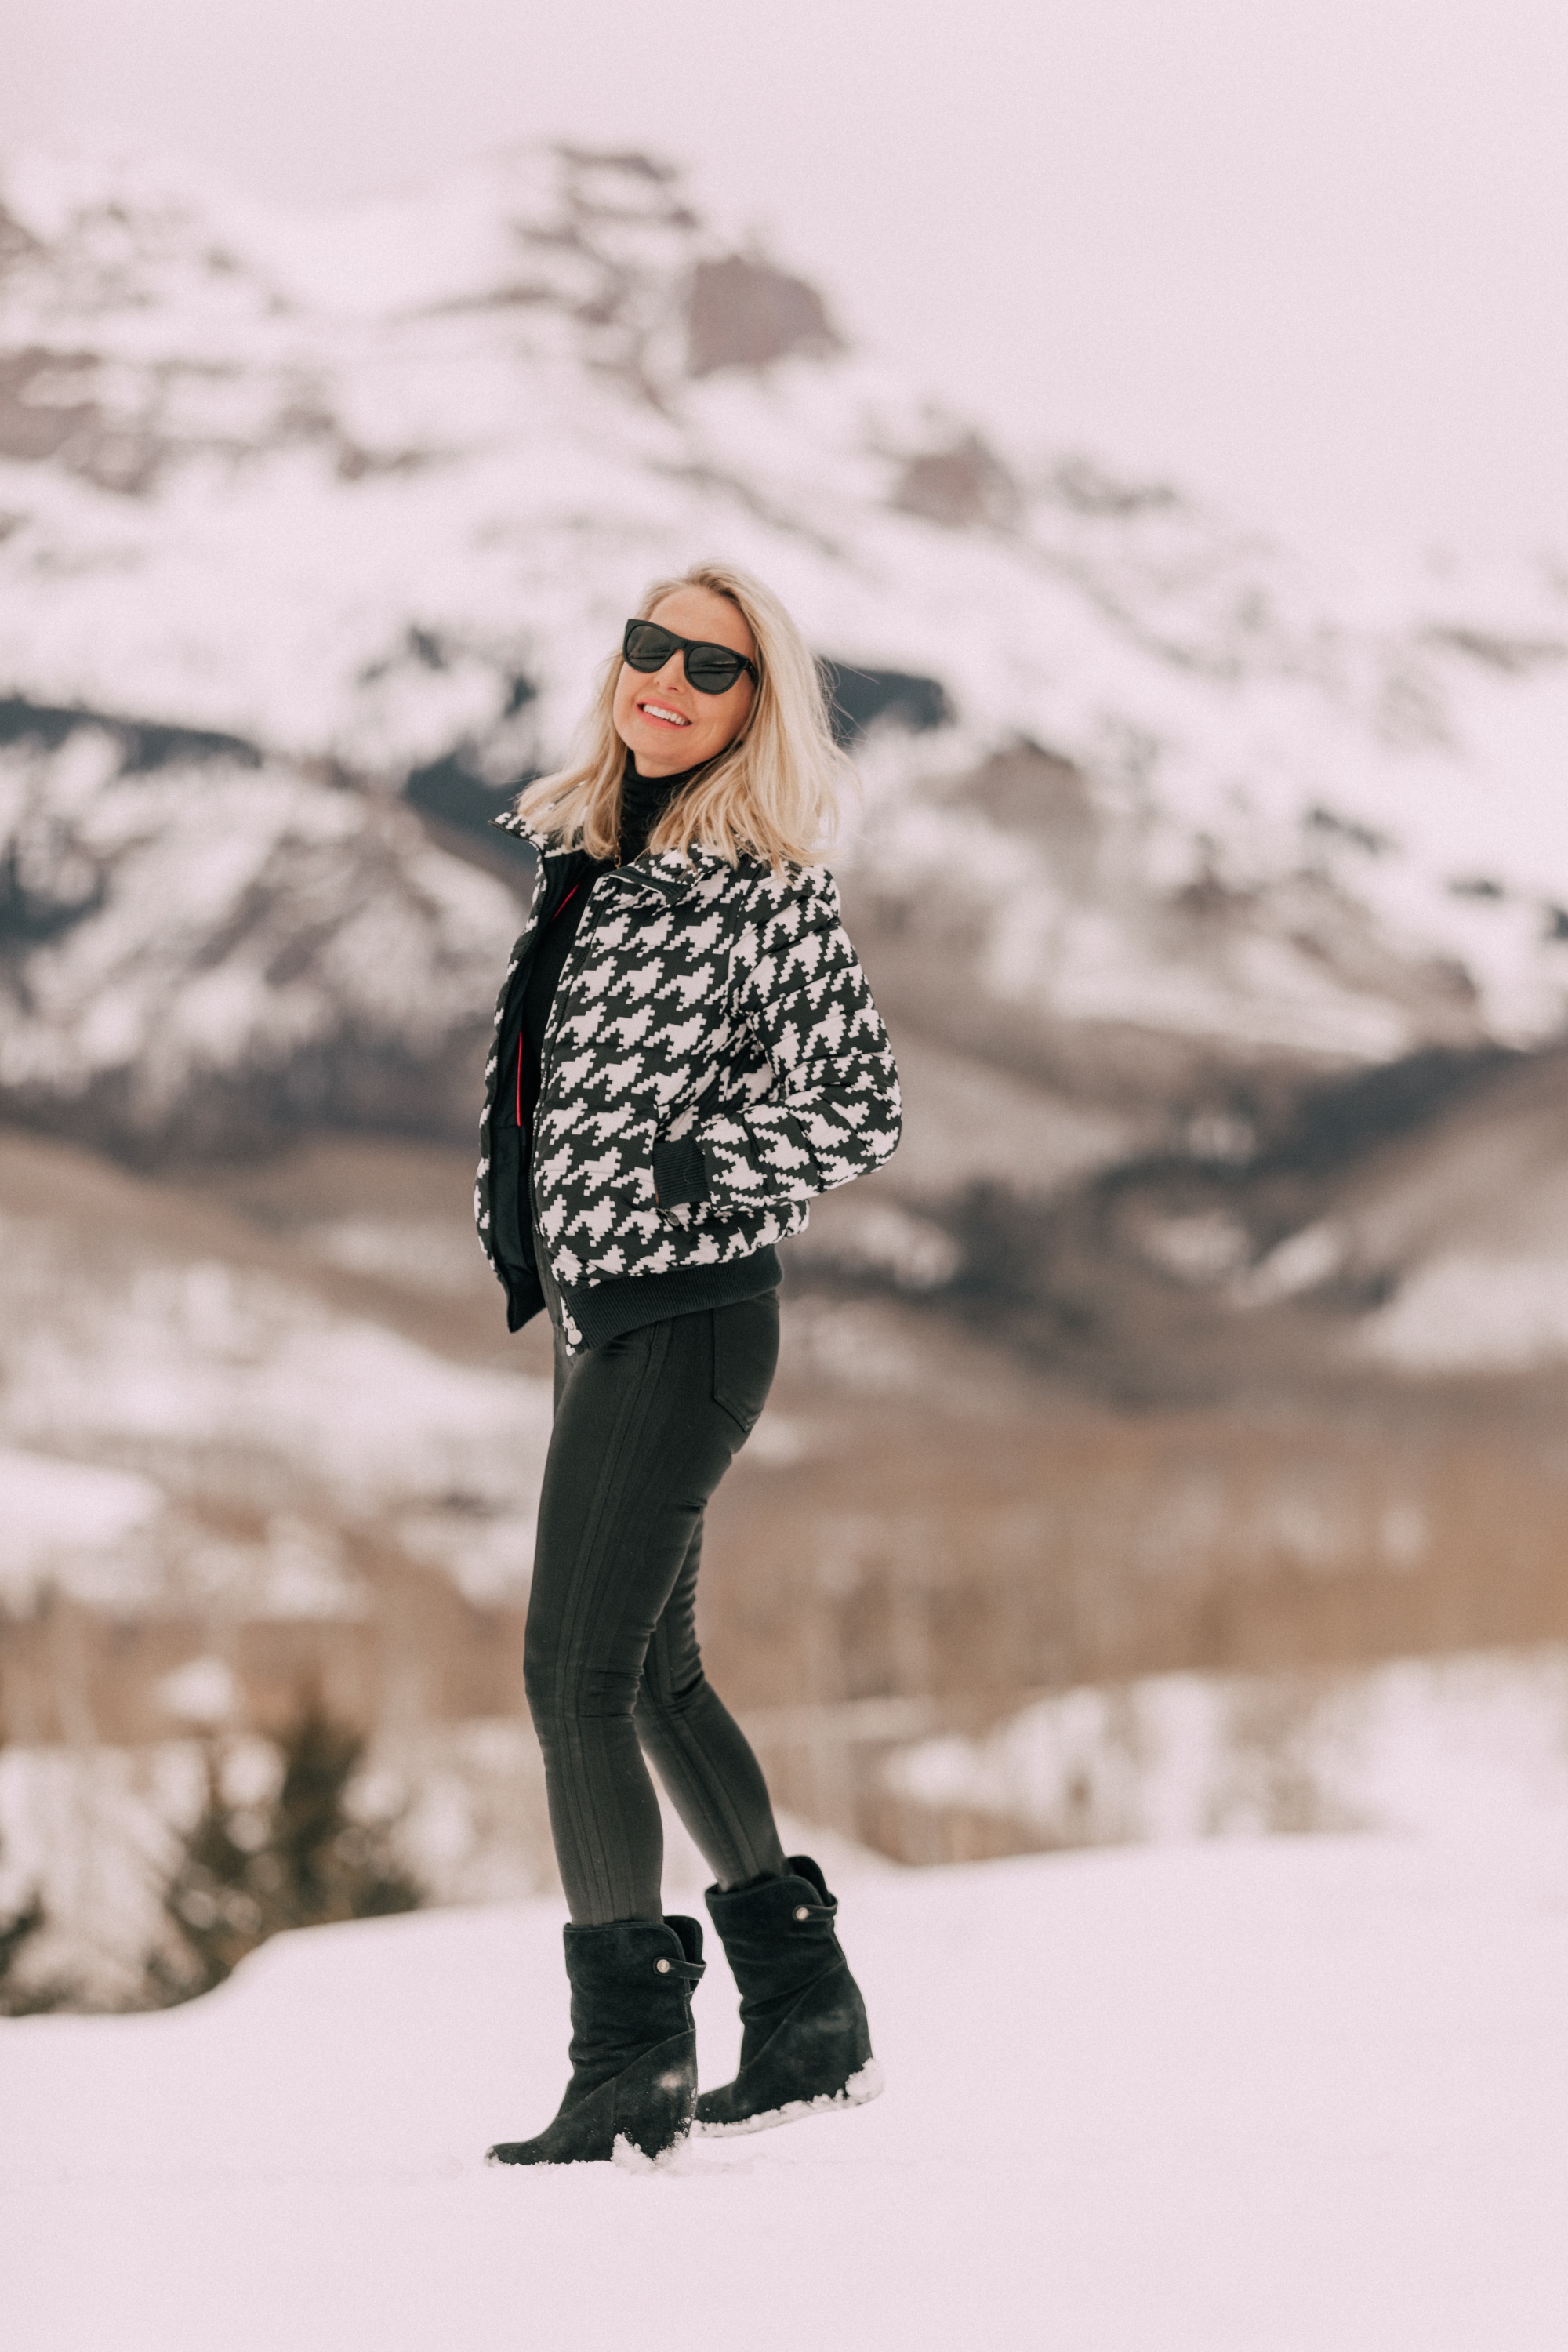 Chic Ski Brand, Fashion blogger Erin Busbee of BusbeeStyle.com wearing black Rocket leatherette Skinny Jeans by Citizens of Humanity with a black cashmere turtleneck sweater by Aqua, and a houndstooth puffer jacket by Perfect Moment from Shopbop, and Ugg wedge boots in the snow in Telluride, CO